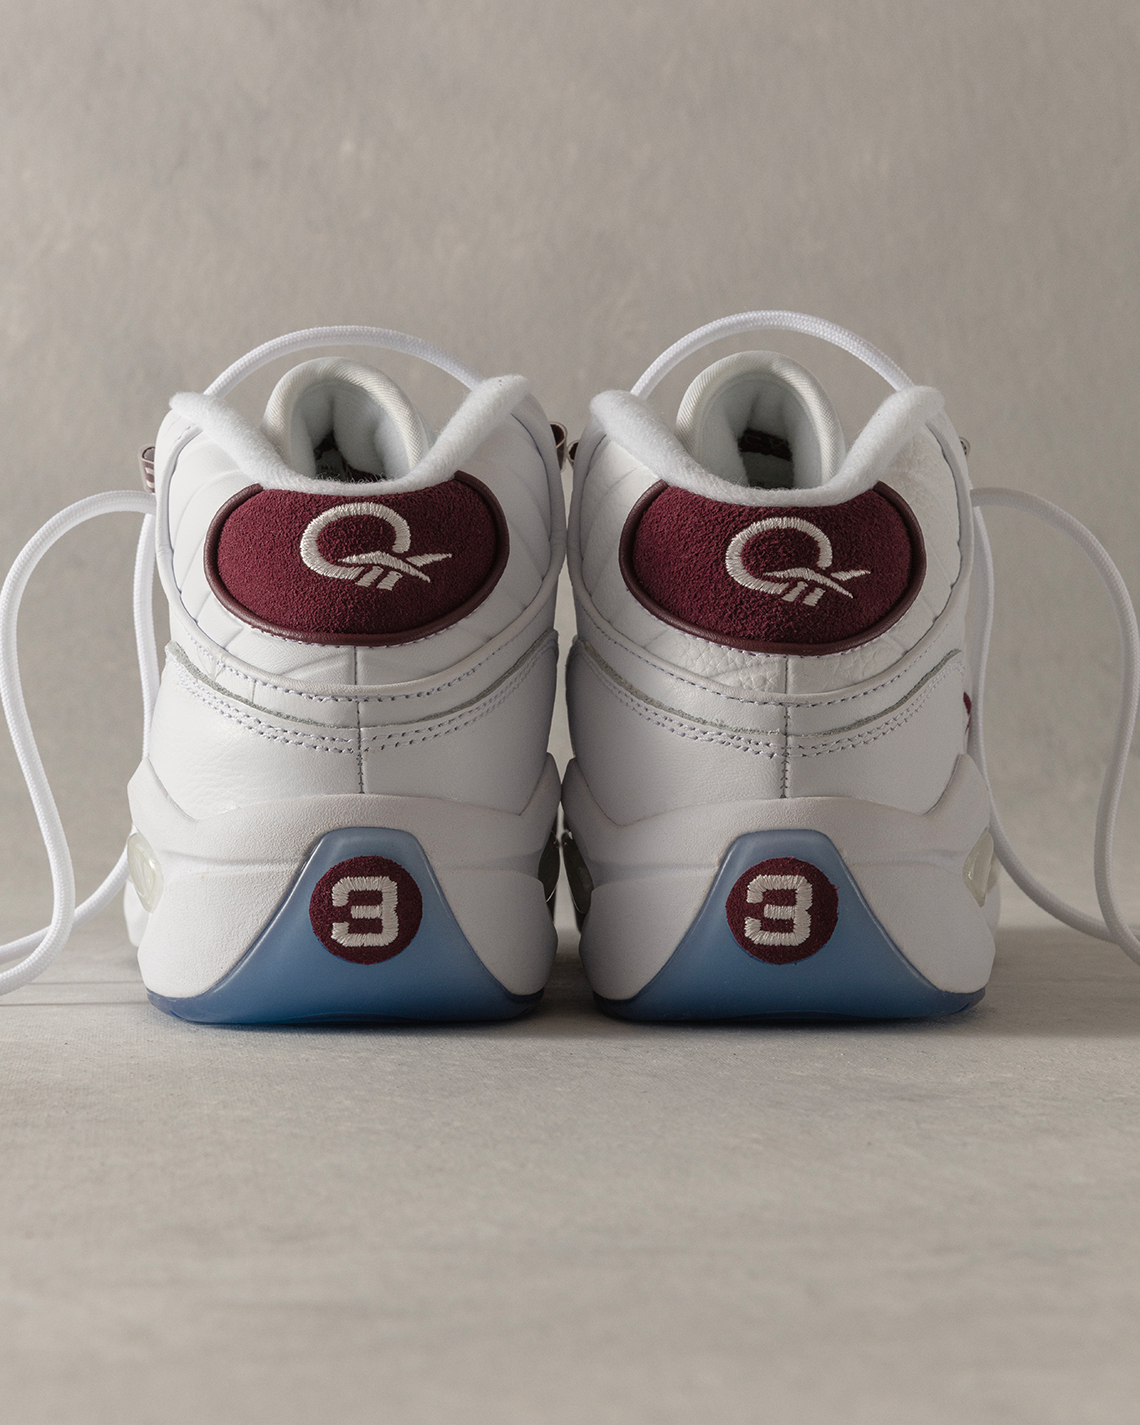 Packer And Omni Reebok Are Releasing A Collaboration This Friday Burgundy Suede Release Date 8